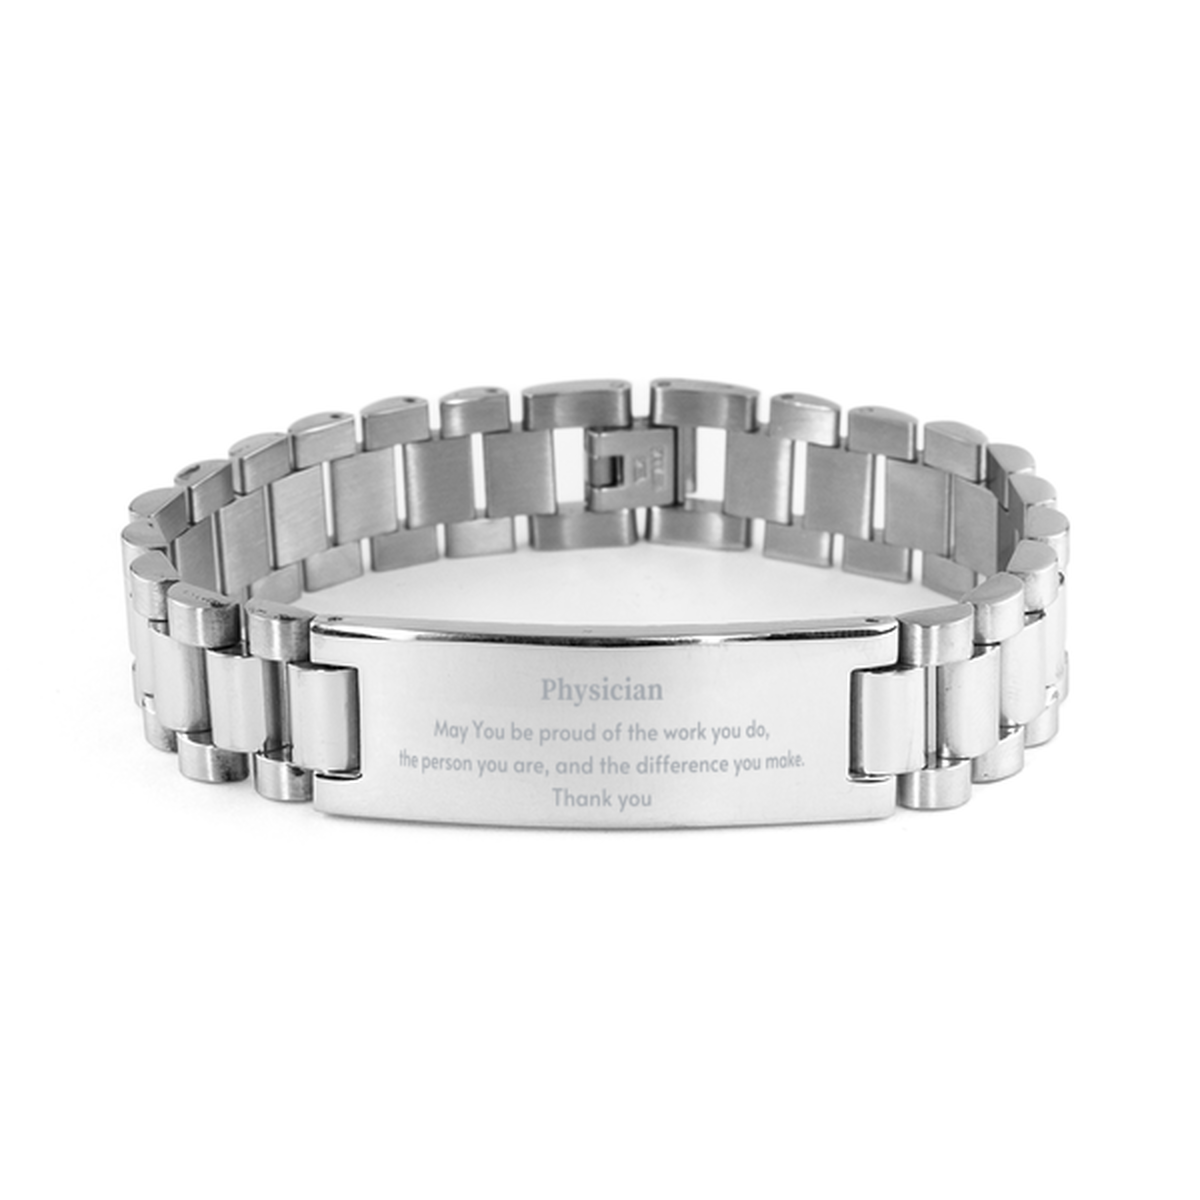 Heartwarming Ladder Stainless Steel Bracelet Retirement Coworkers Gifts for Physician, Physician May You be proud of the work you do, the person you are Gifts for Boss Men Women Friends